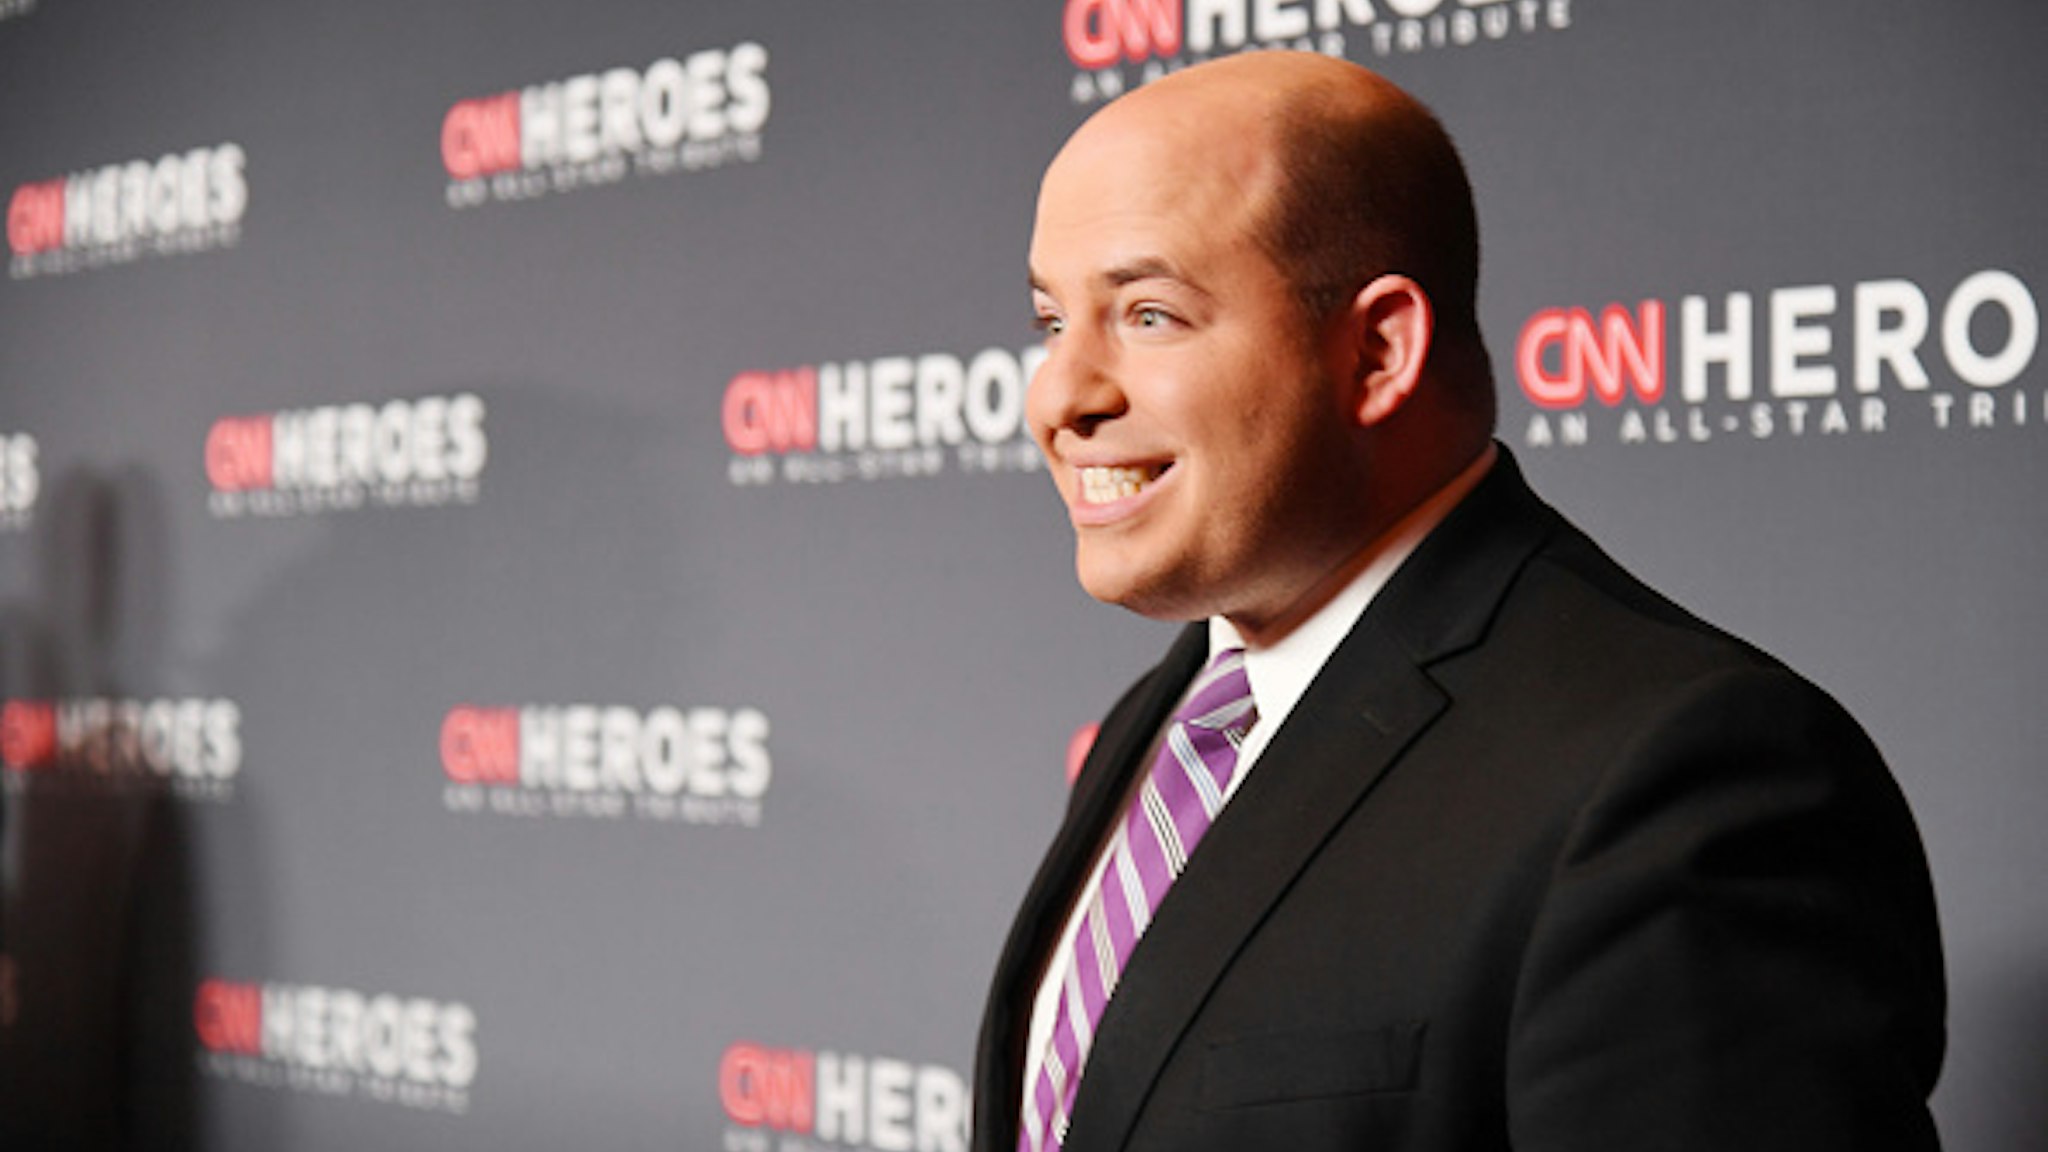 NEW YORK, NY - DECEMBER 09: Brian Stelter attends the 12th Annual CNN Heroes: An All-Star Tribute at American Museum of Natural History on December 9, 2018 in New York City.